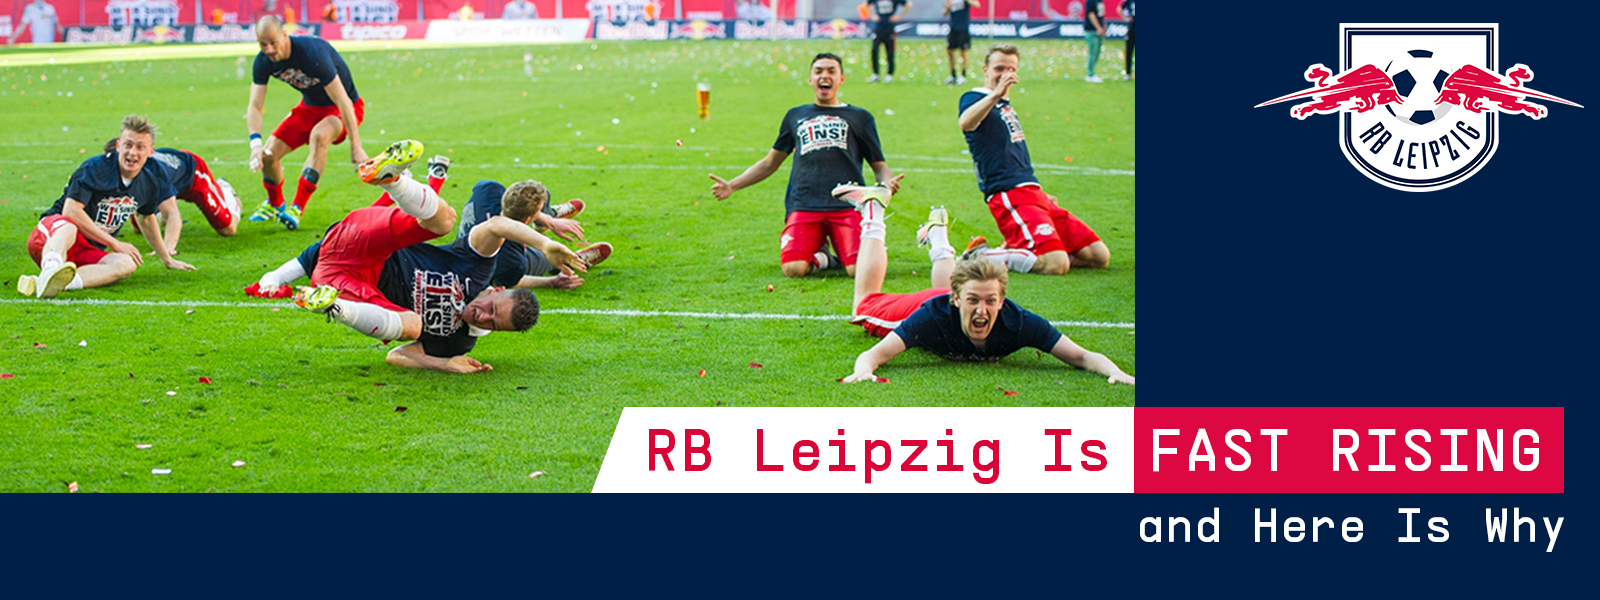 RB Leipzig Is Fast Rising and Here Is Why